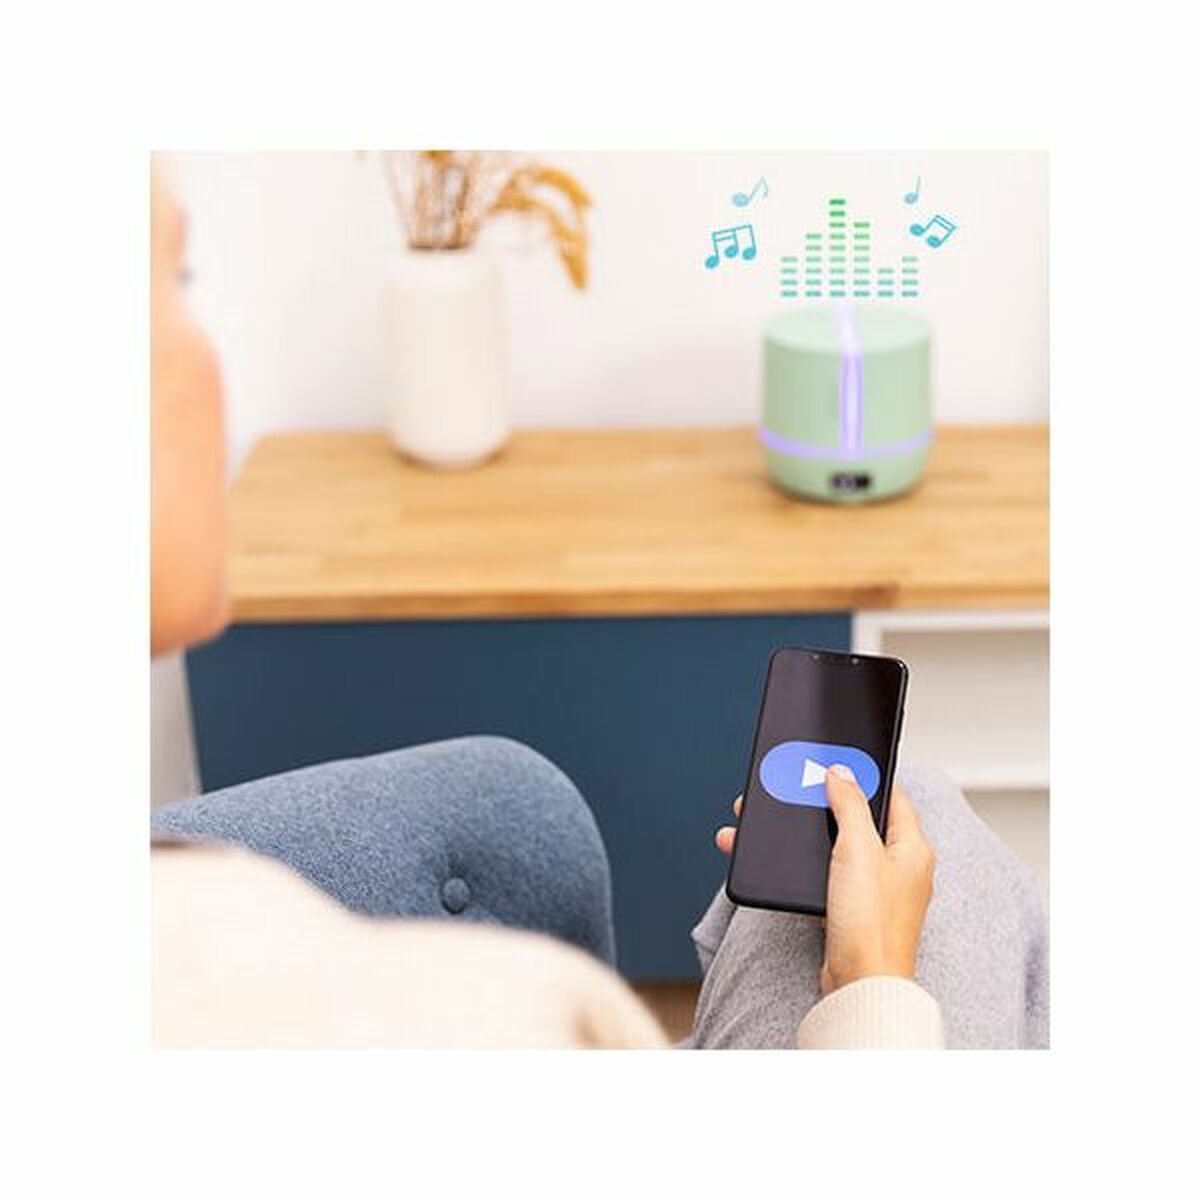 Humidifier PureAroma 550 Connected Sky Cecotec Blue (500 ml)